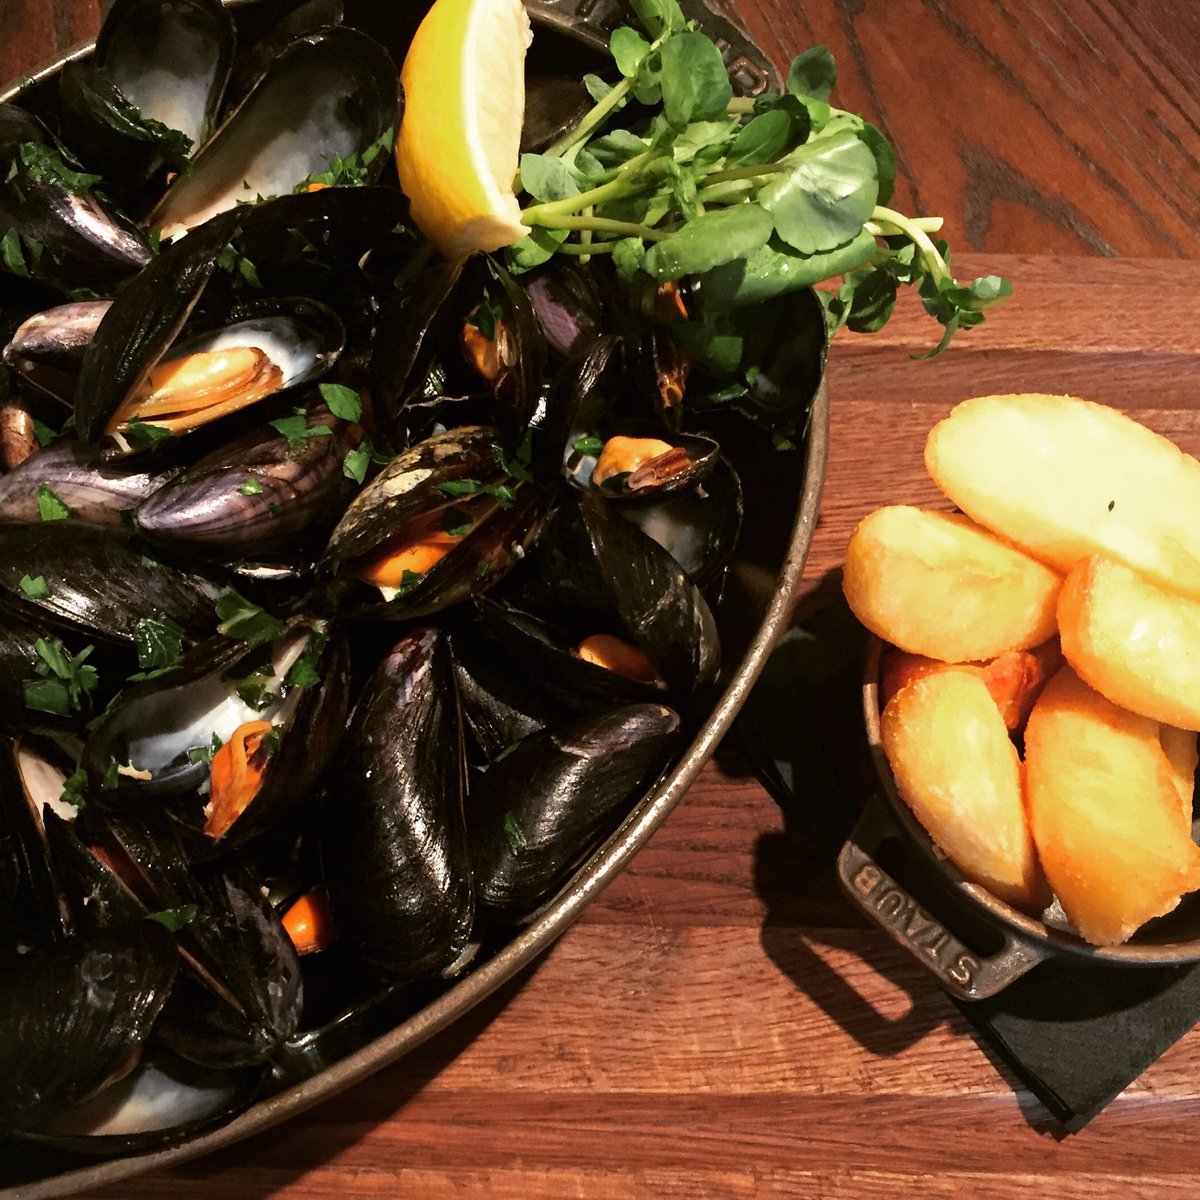 Fresh from Billingsgate Market - steamed Cornish mussels, white wine and garlic, hand cut chips #delicious #marketfish #fresh #foodie